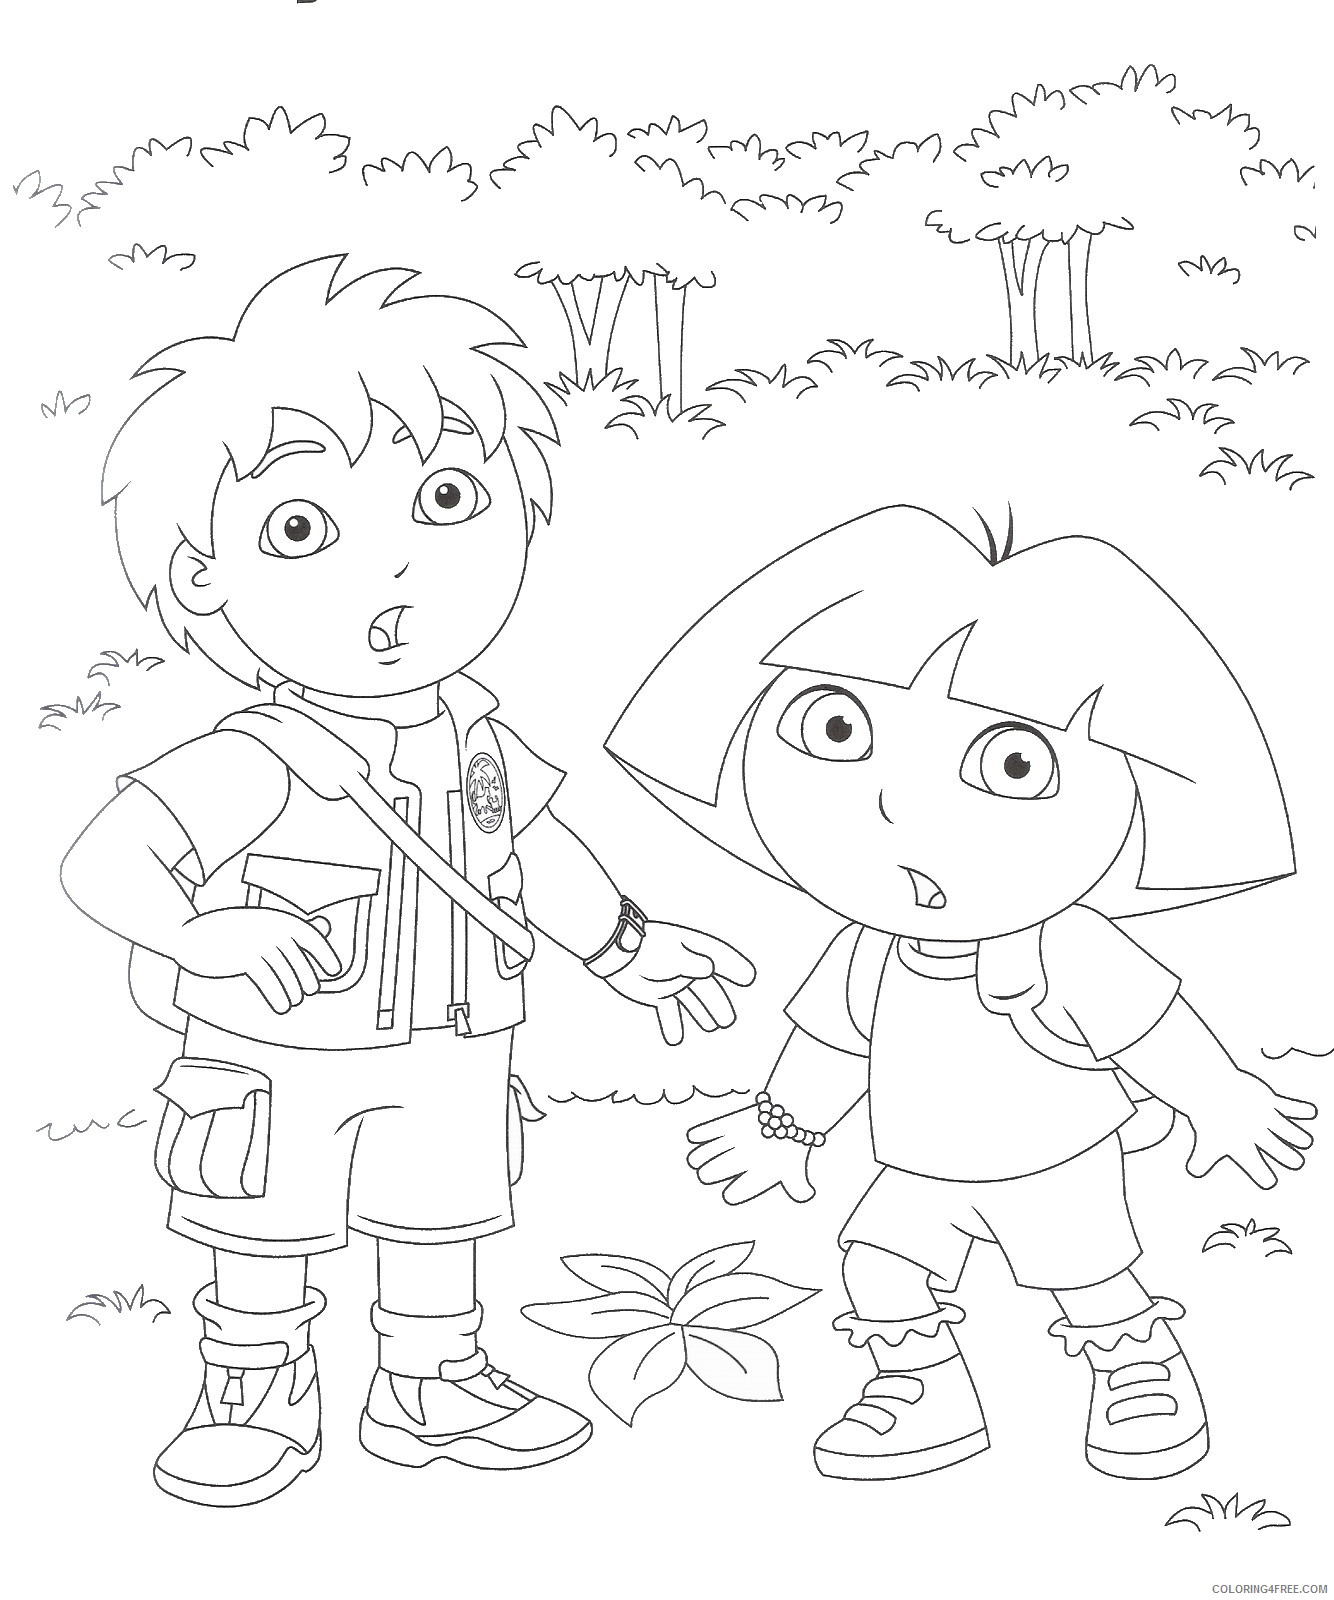 Go Diego Go Coloring Pages Cartoons run_diego_cl_03 Printable 2020 2950 Coloring4free